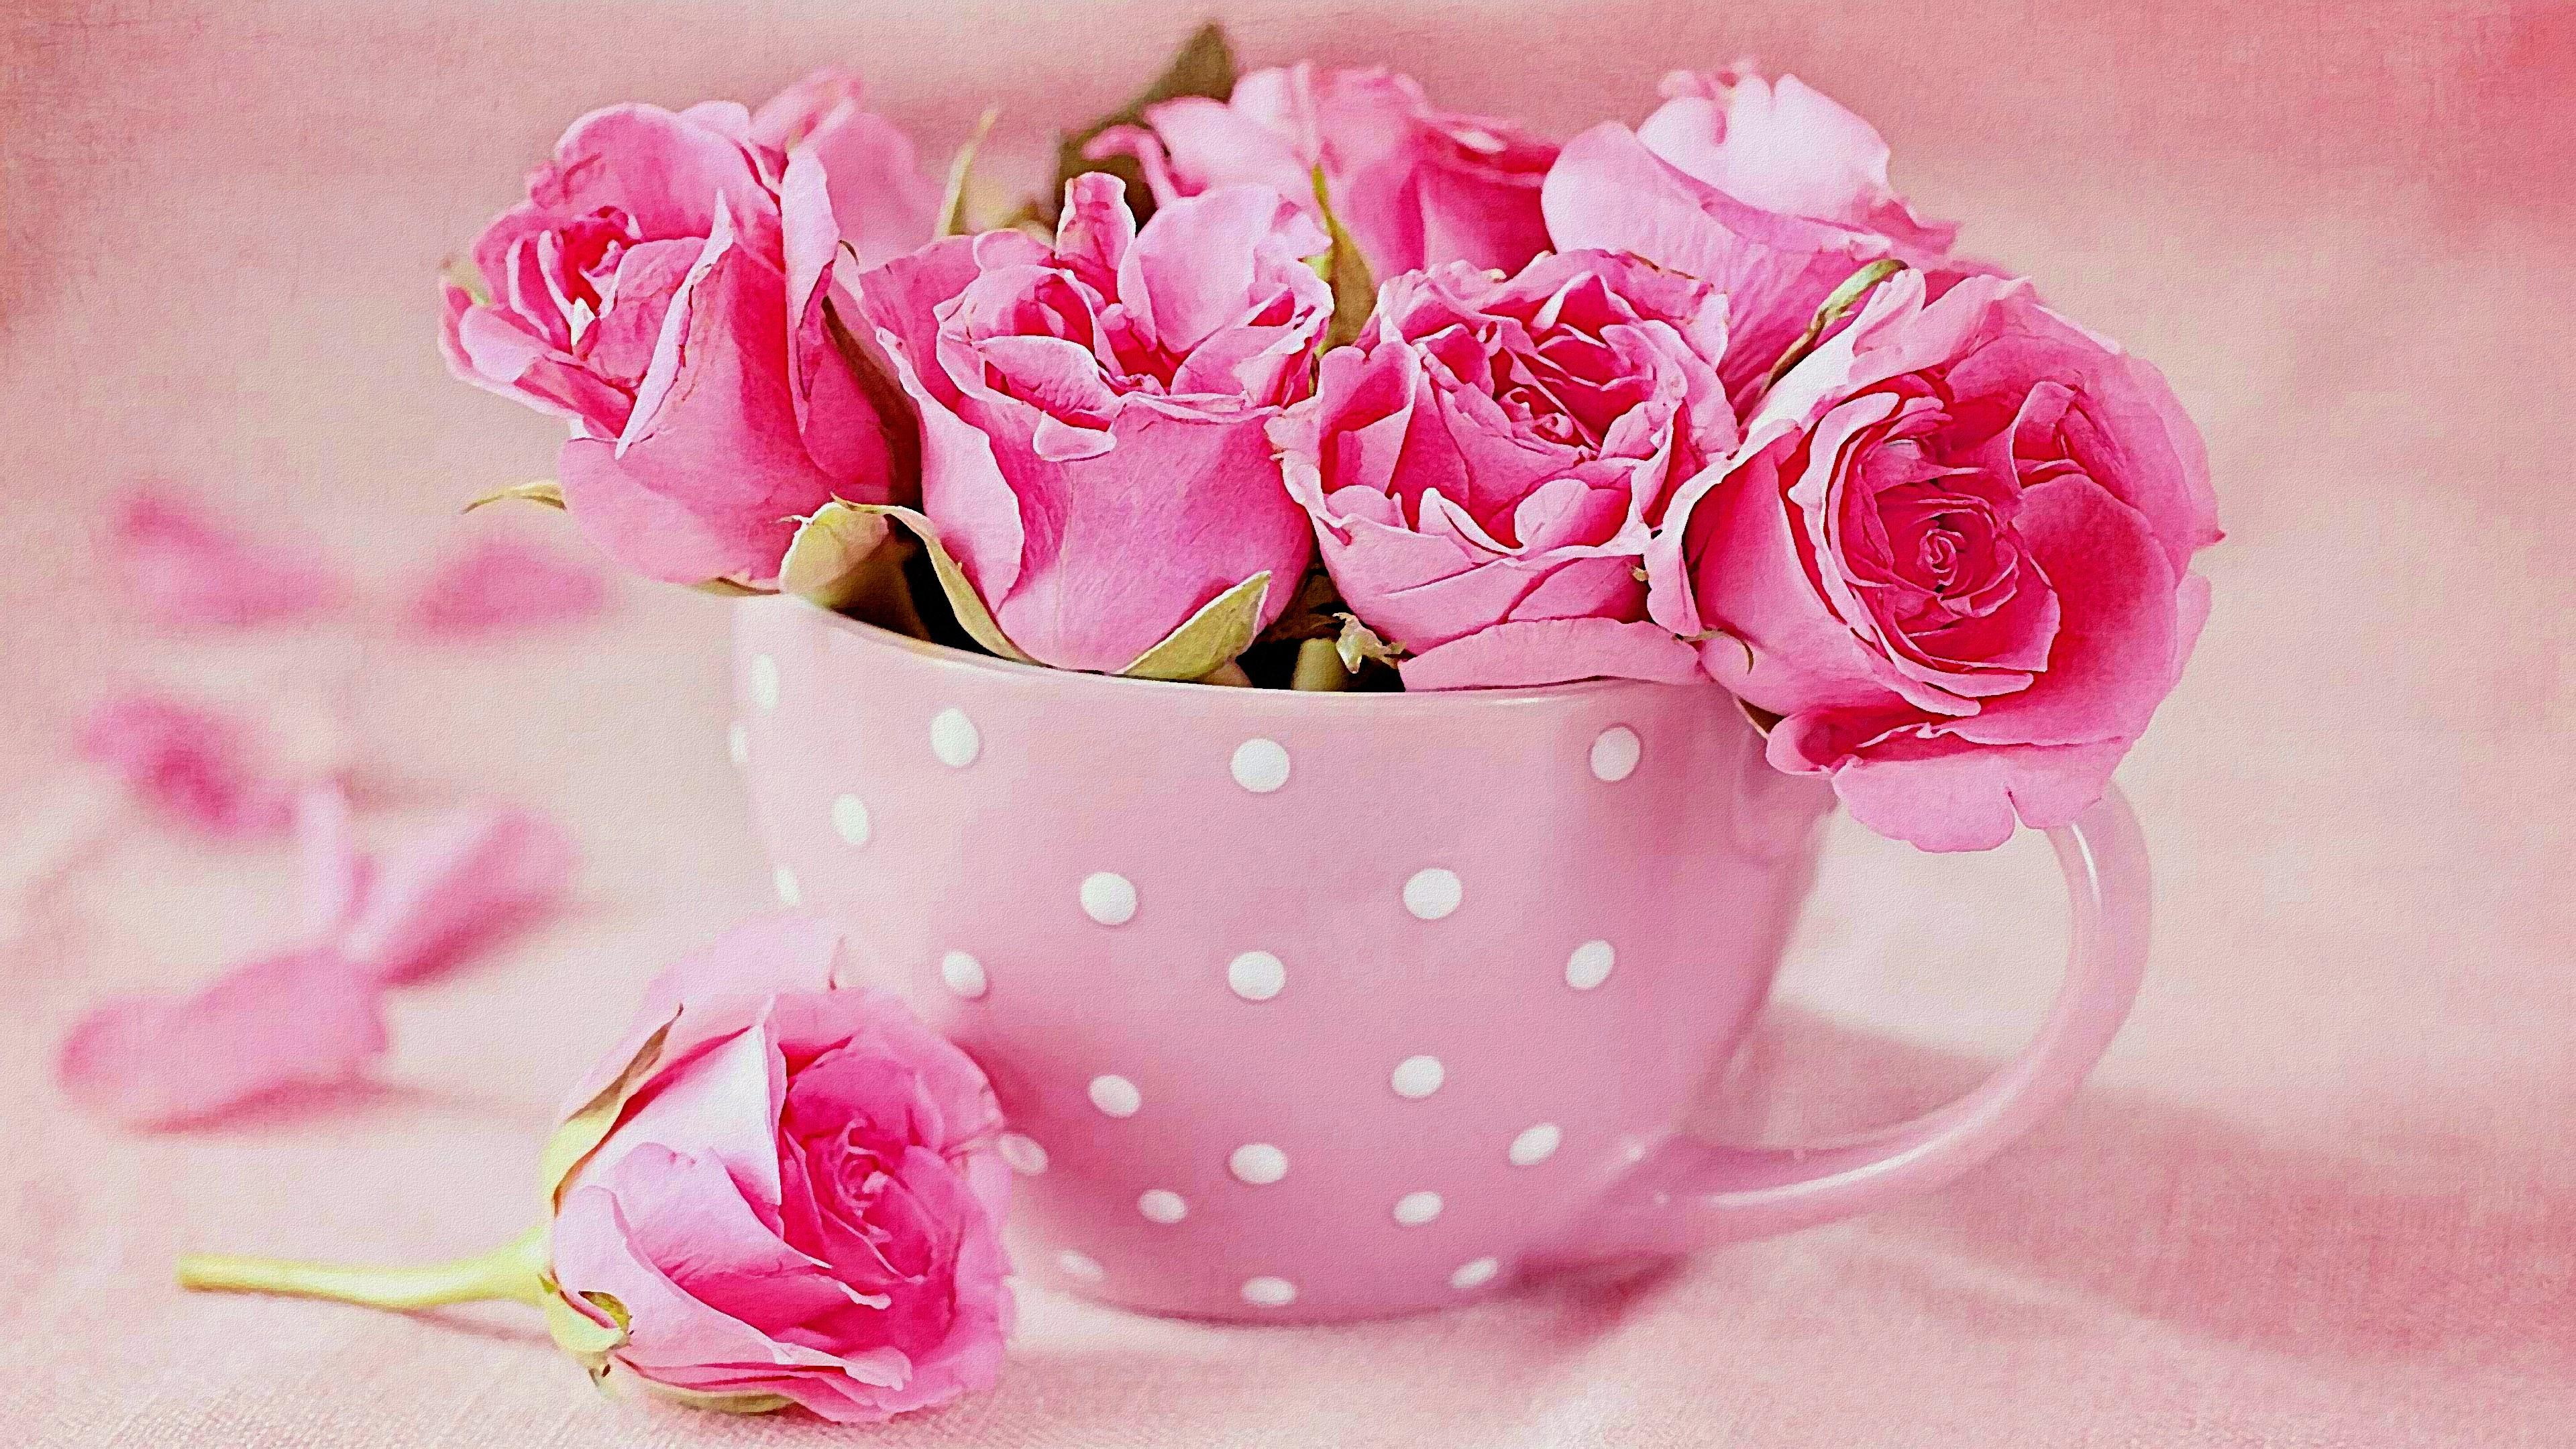 romantic, good morning, roses, cup